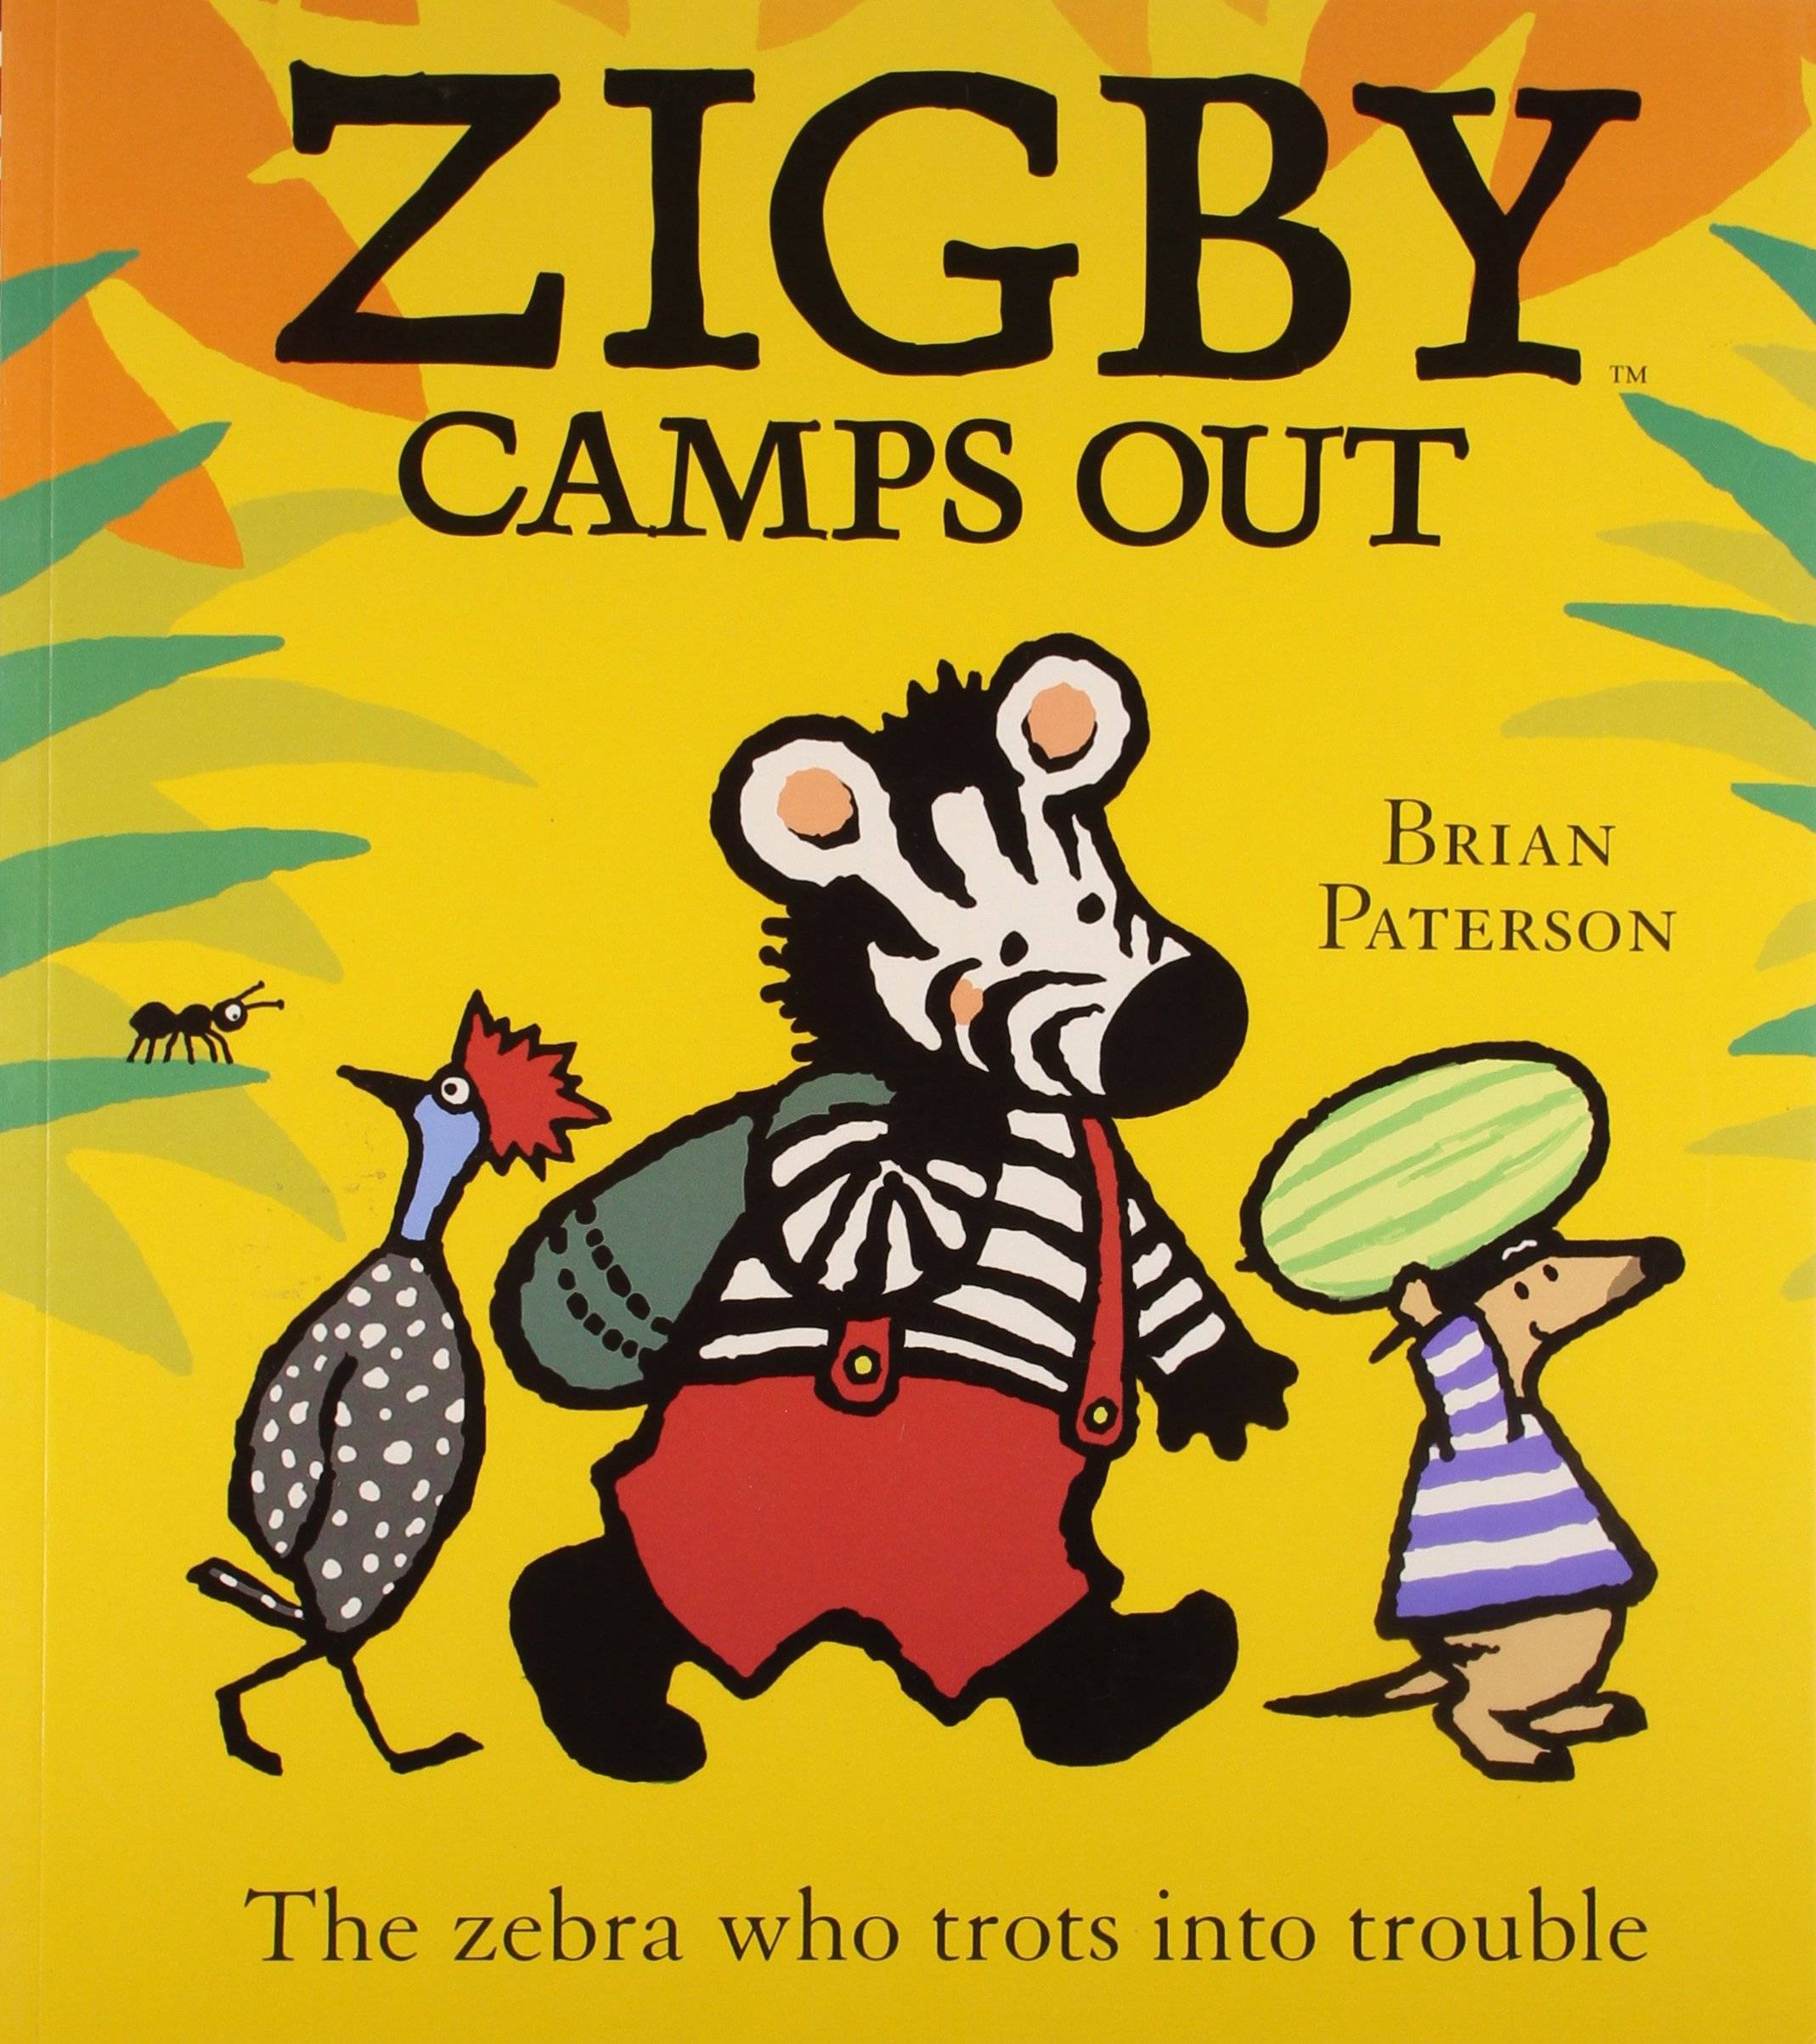 IMG : Zigby Camps Out